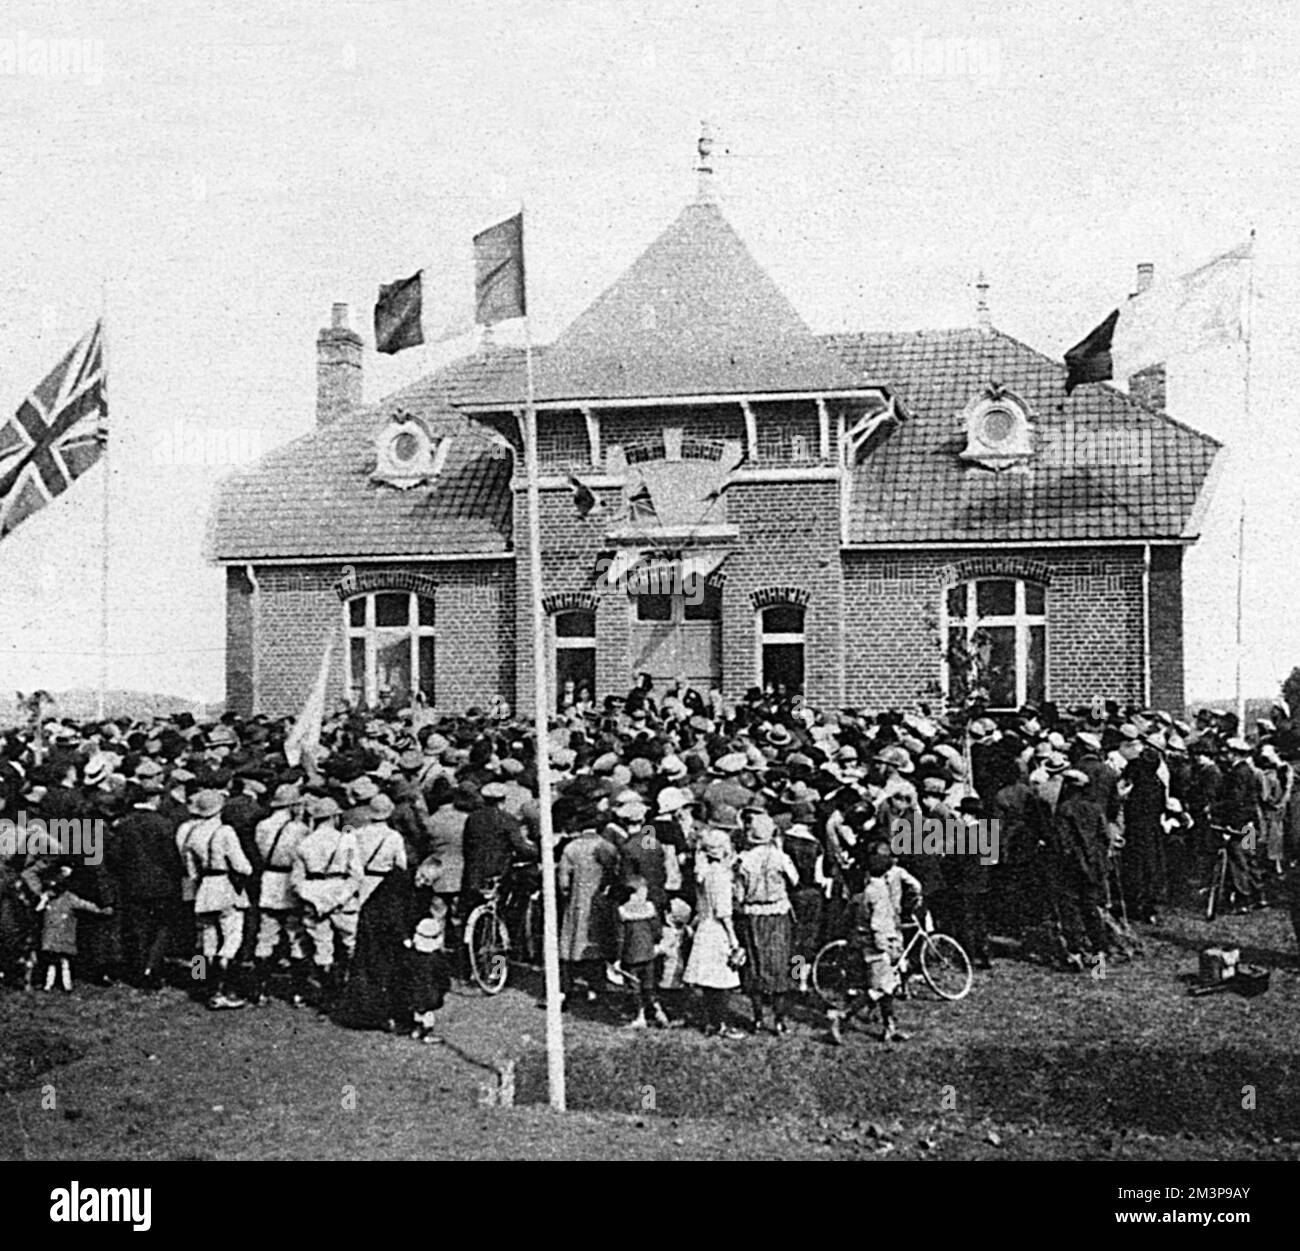 Liverpool's gift to its adopted French town : the new memorial hall at Givenchy after the opening ceremony performed by the Lord Mayor of Liverpool. Part of the British League of Help's 'adoption' of French towns by British ones to help rebuild devastated areas of France after the First World War.     Date: 1924 Stock Photo